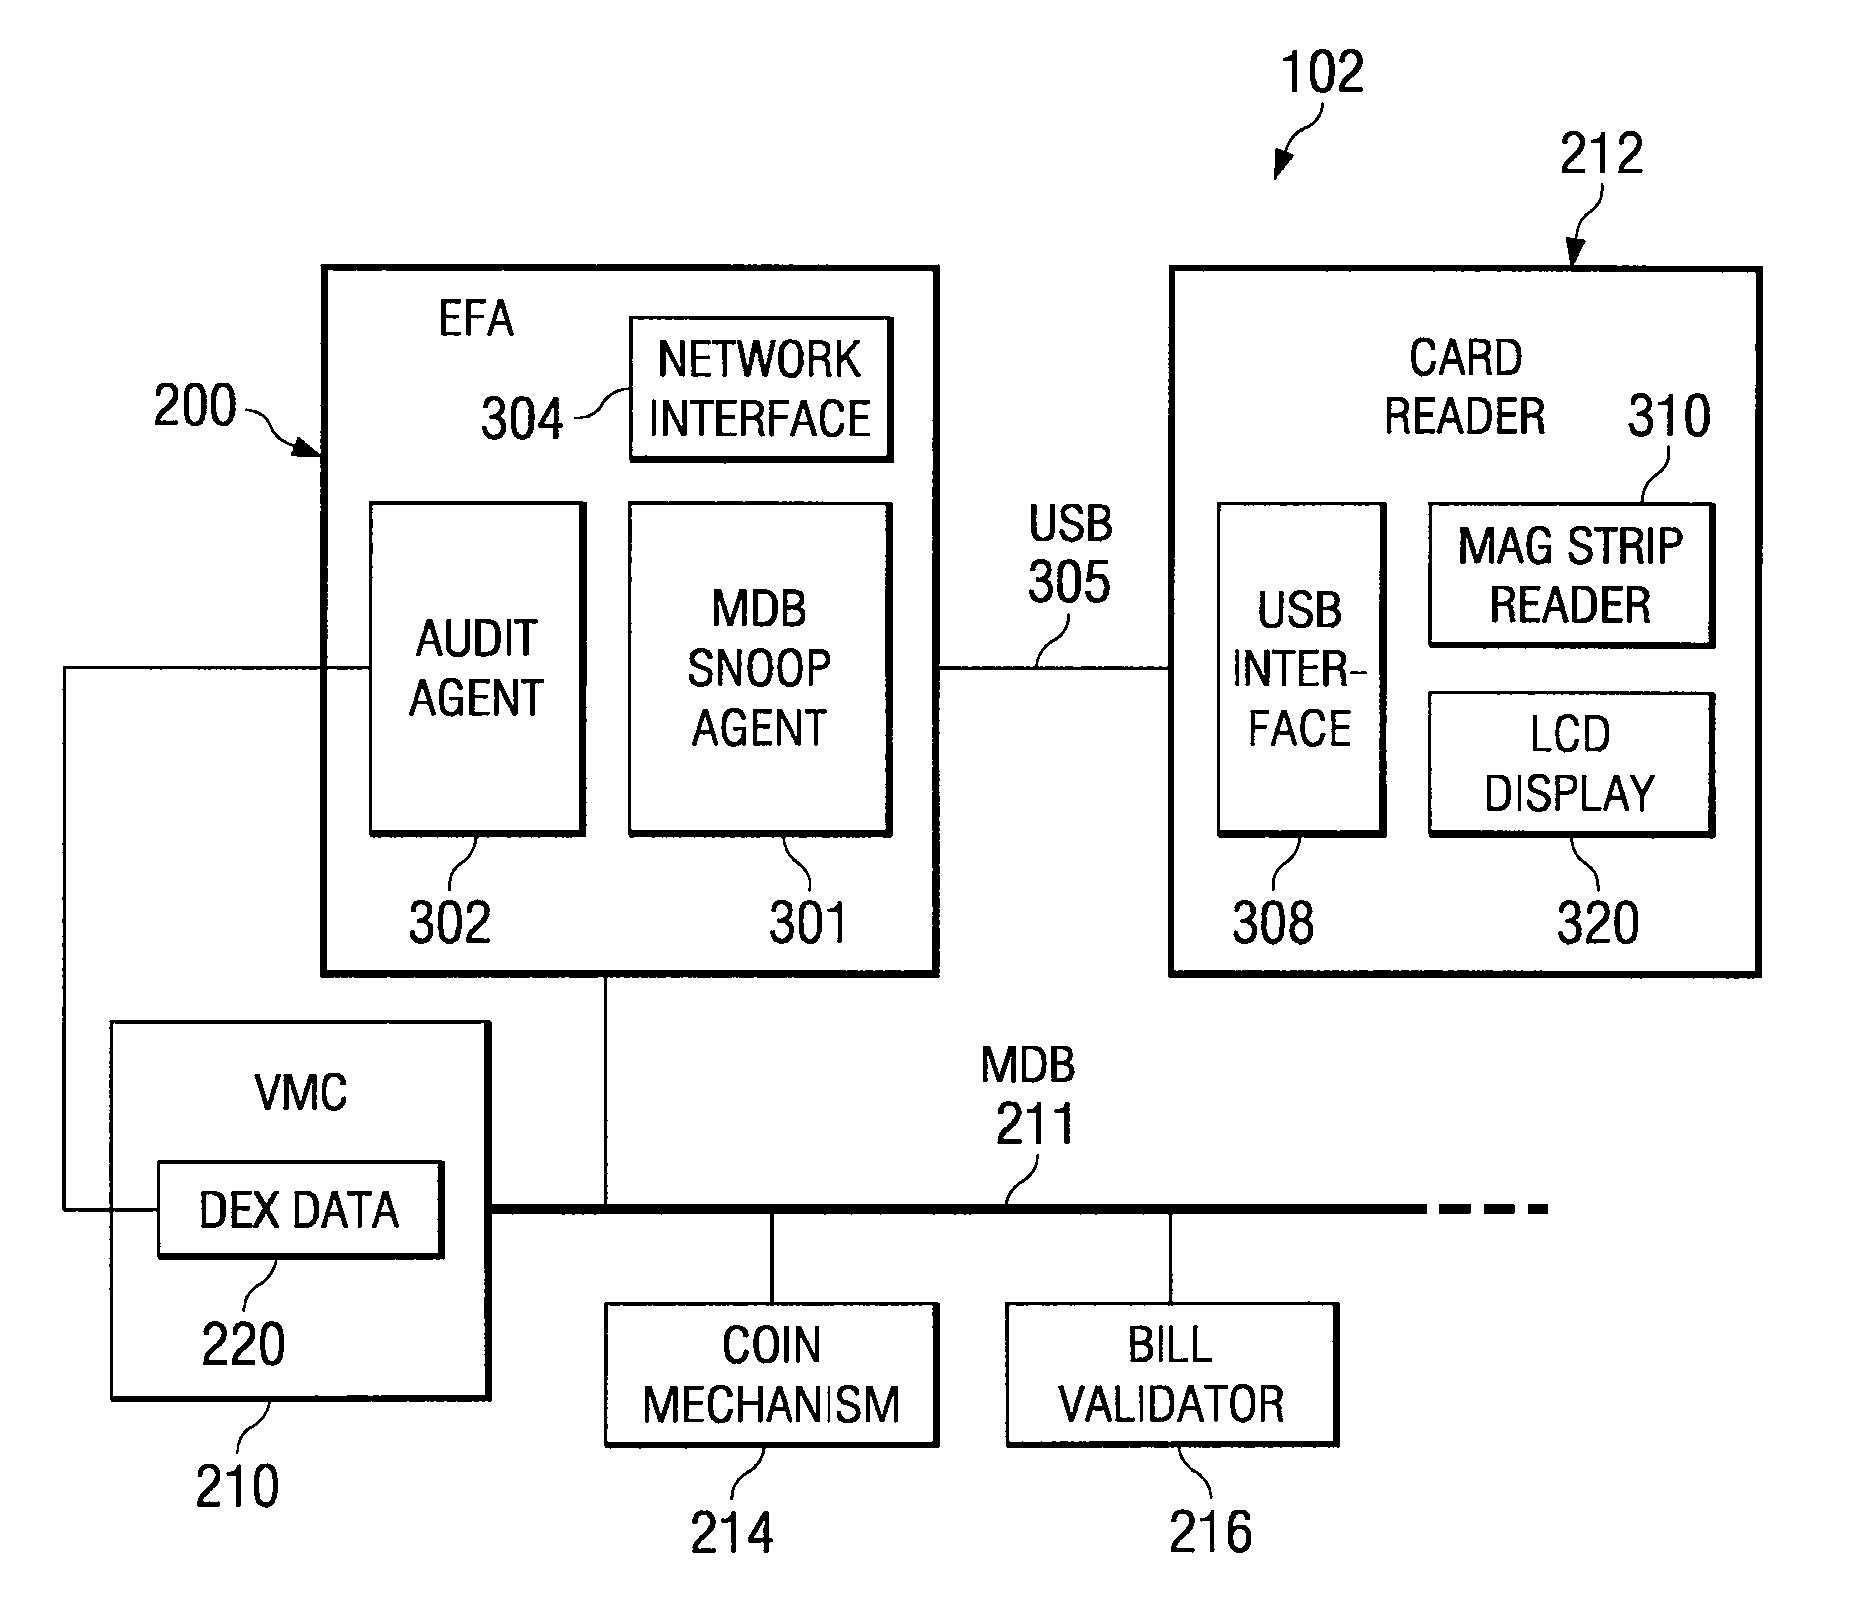 Systems and methods for monitoring performance of field assets